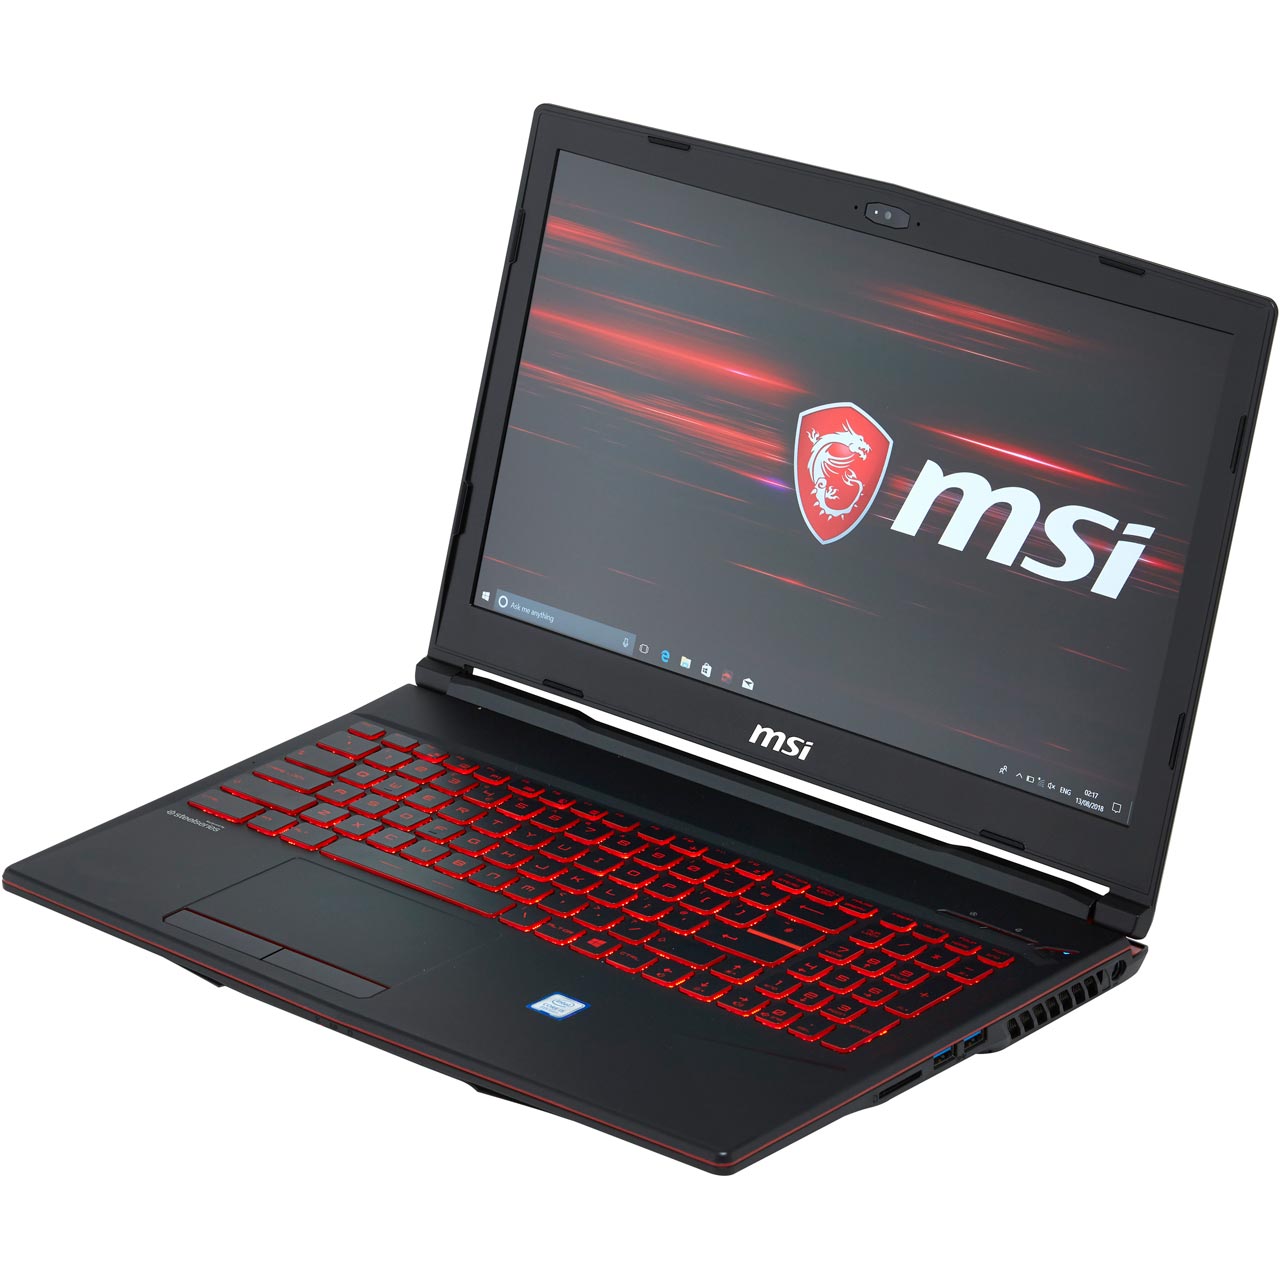 MSI GL63 Review: The Best Gaming Laptop from MSI with High Specs and